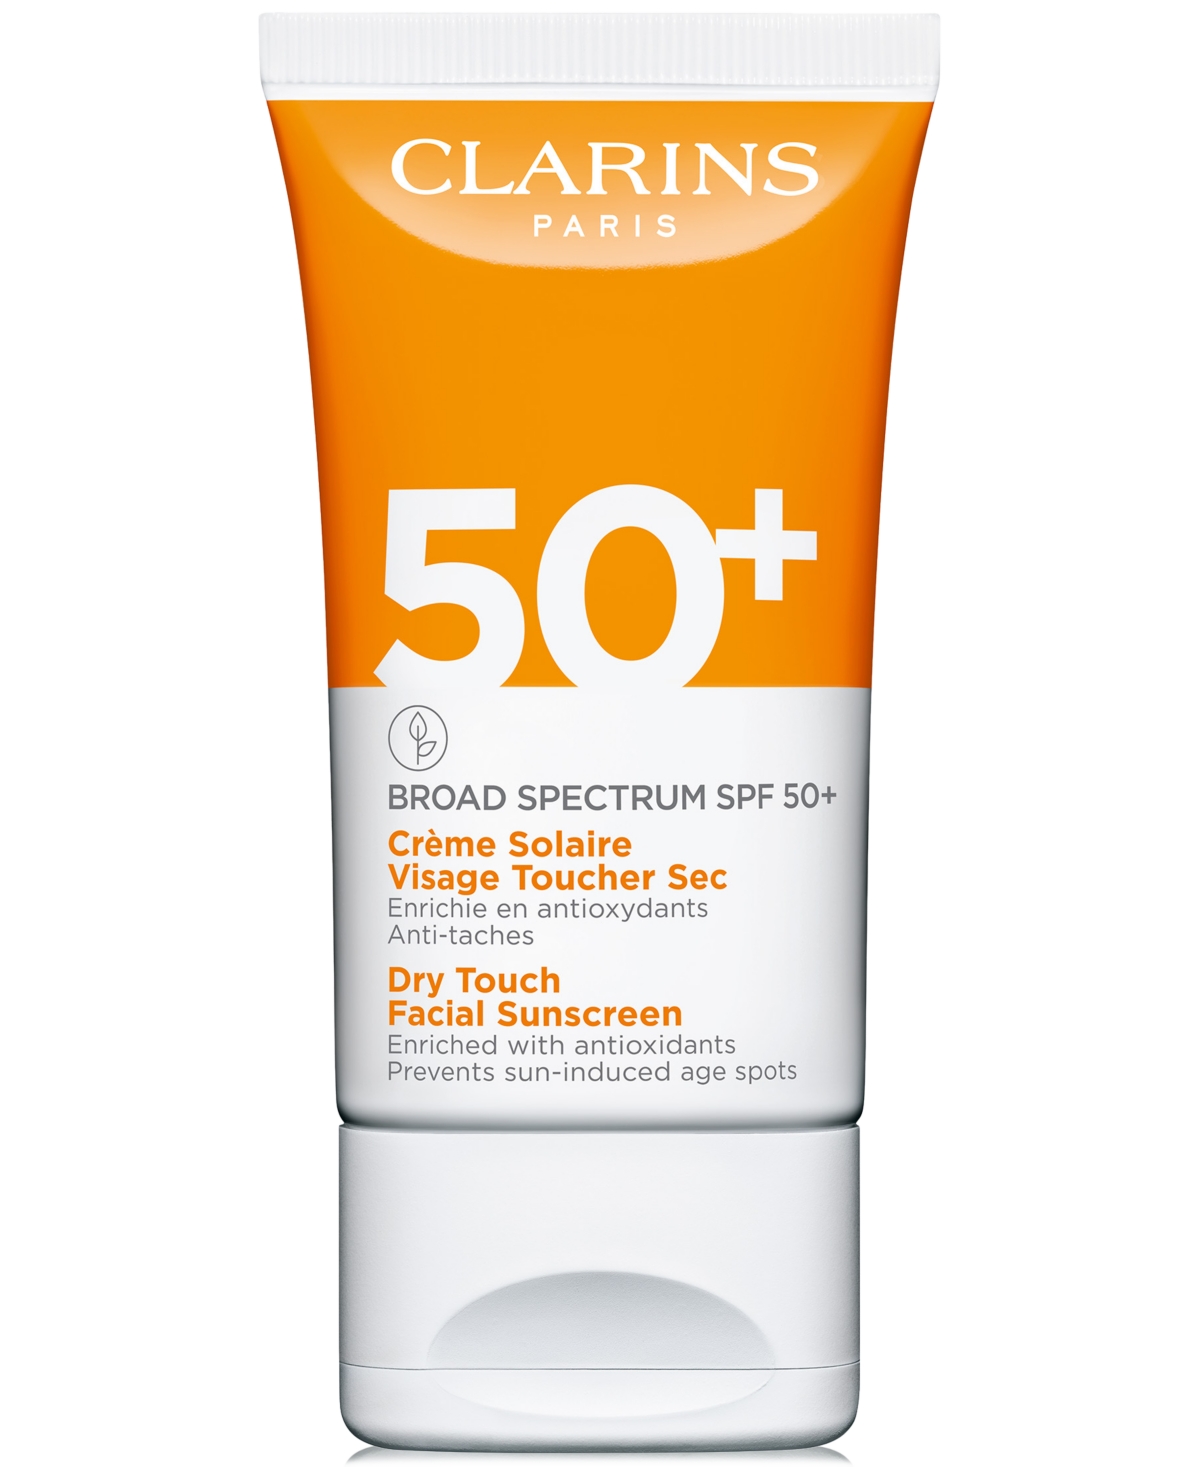 Clarins Dry Touch Facial Sunscreen Broad Spectrum Spf 50+, 1.7 Oz. In No Color